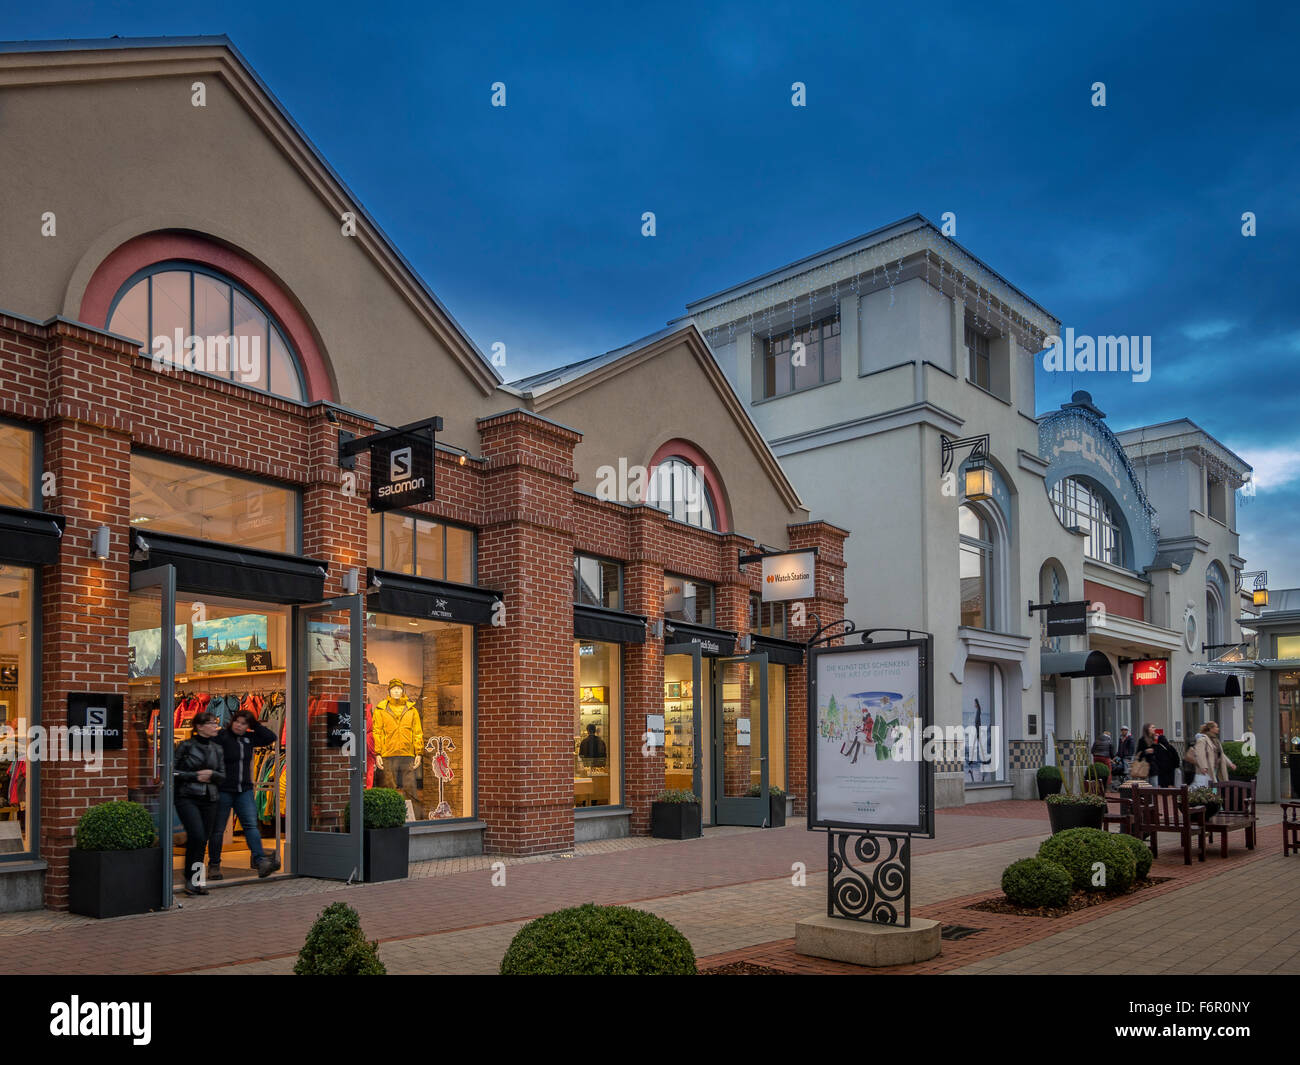 Ingolstadt Village High Resolution Stock Photography and Images - Alamy